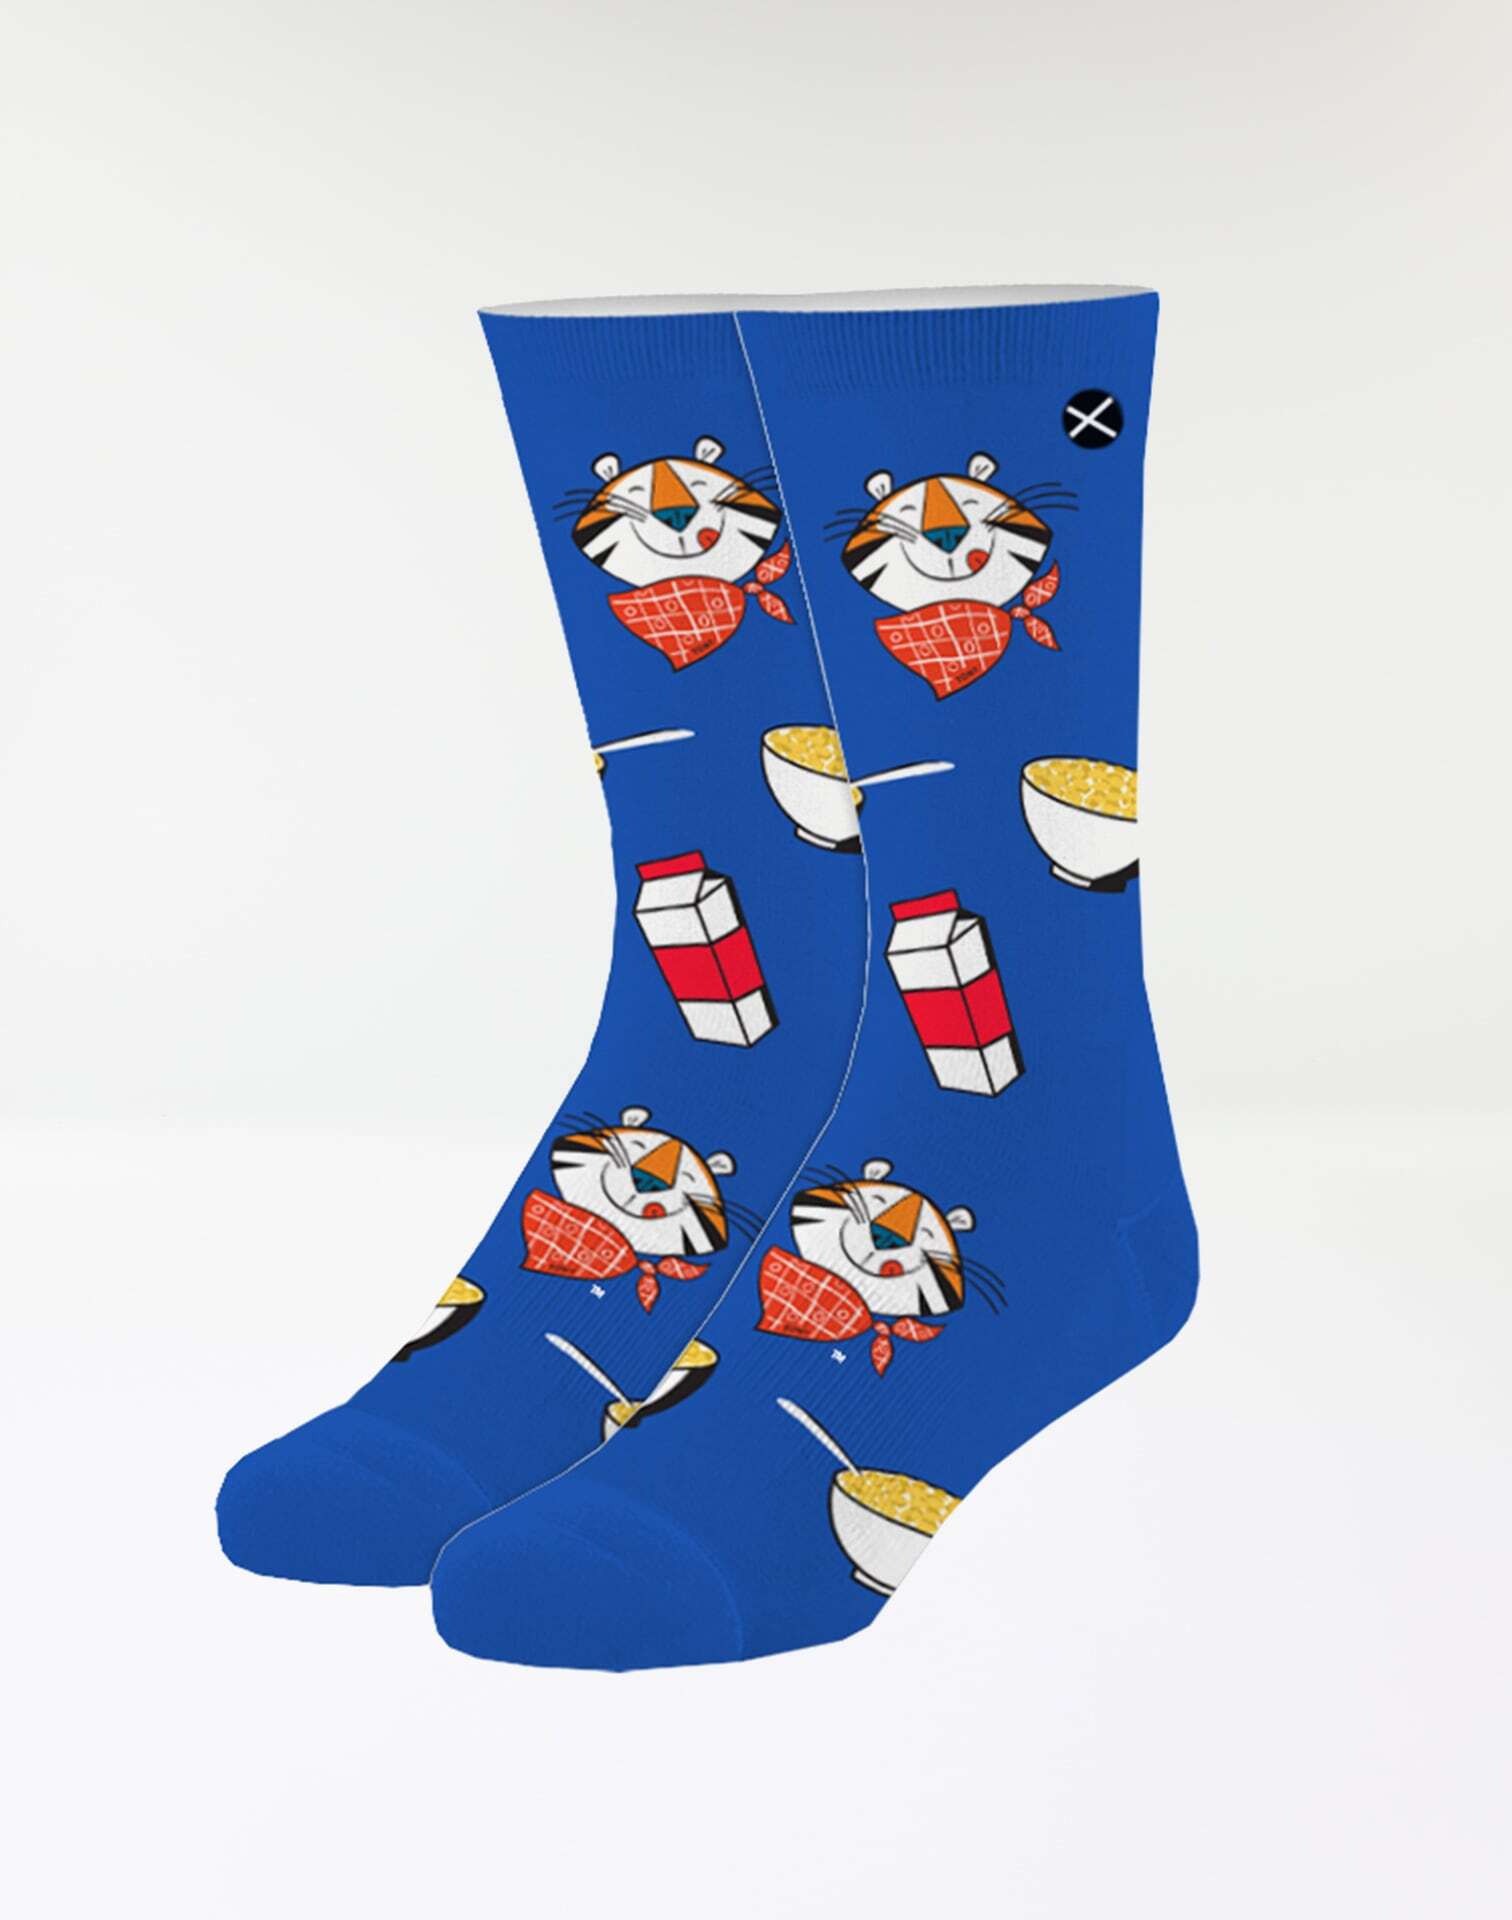 Odd Sox Men's Frosted Flakes